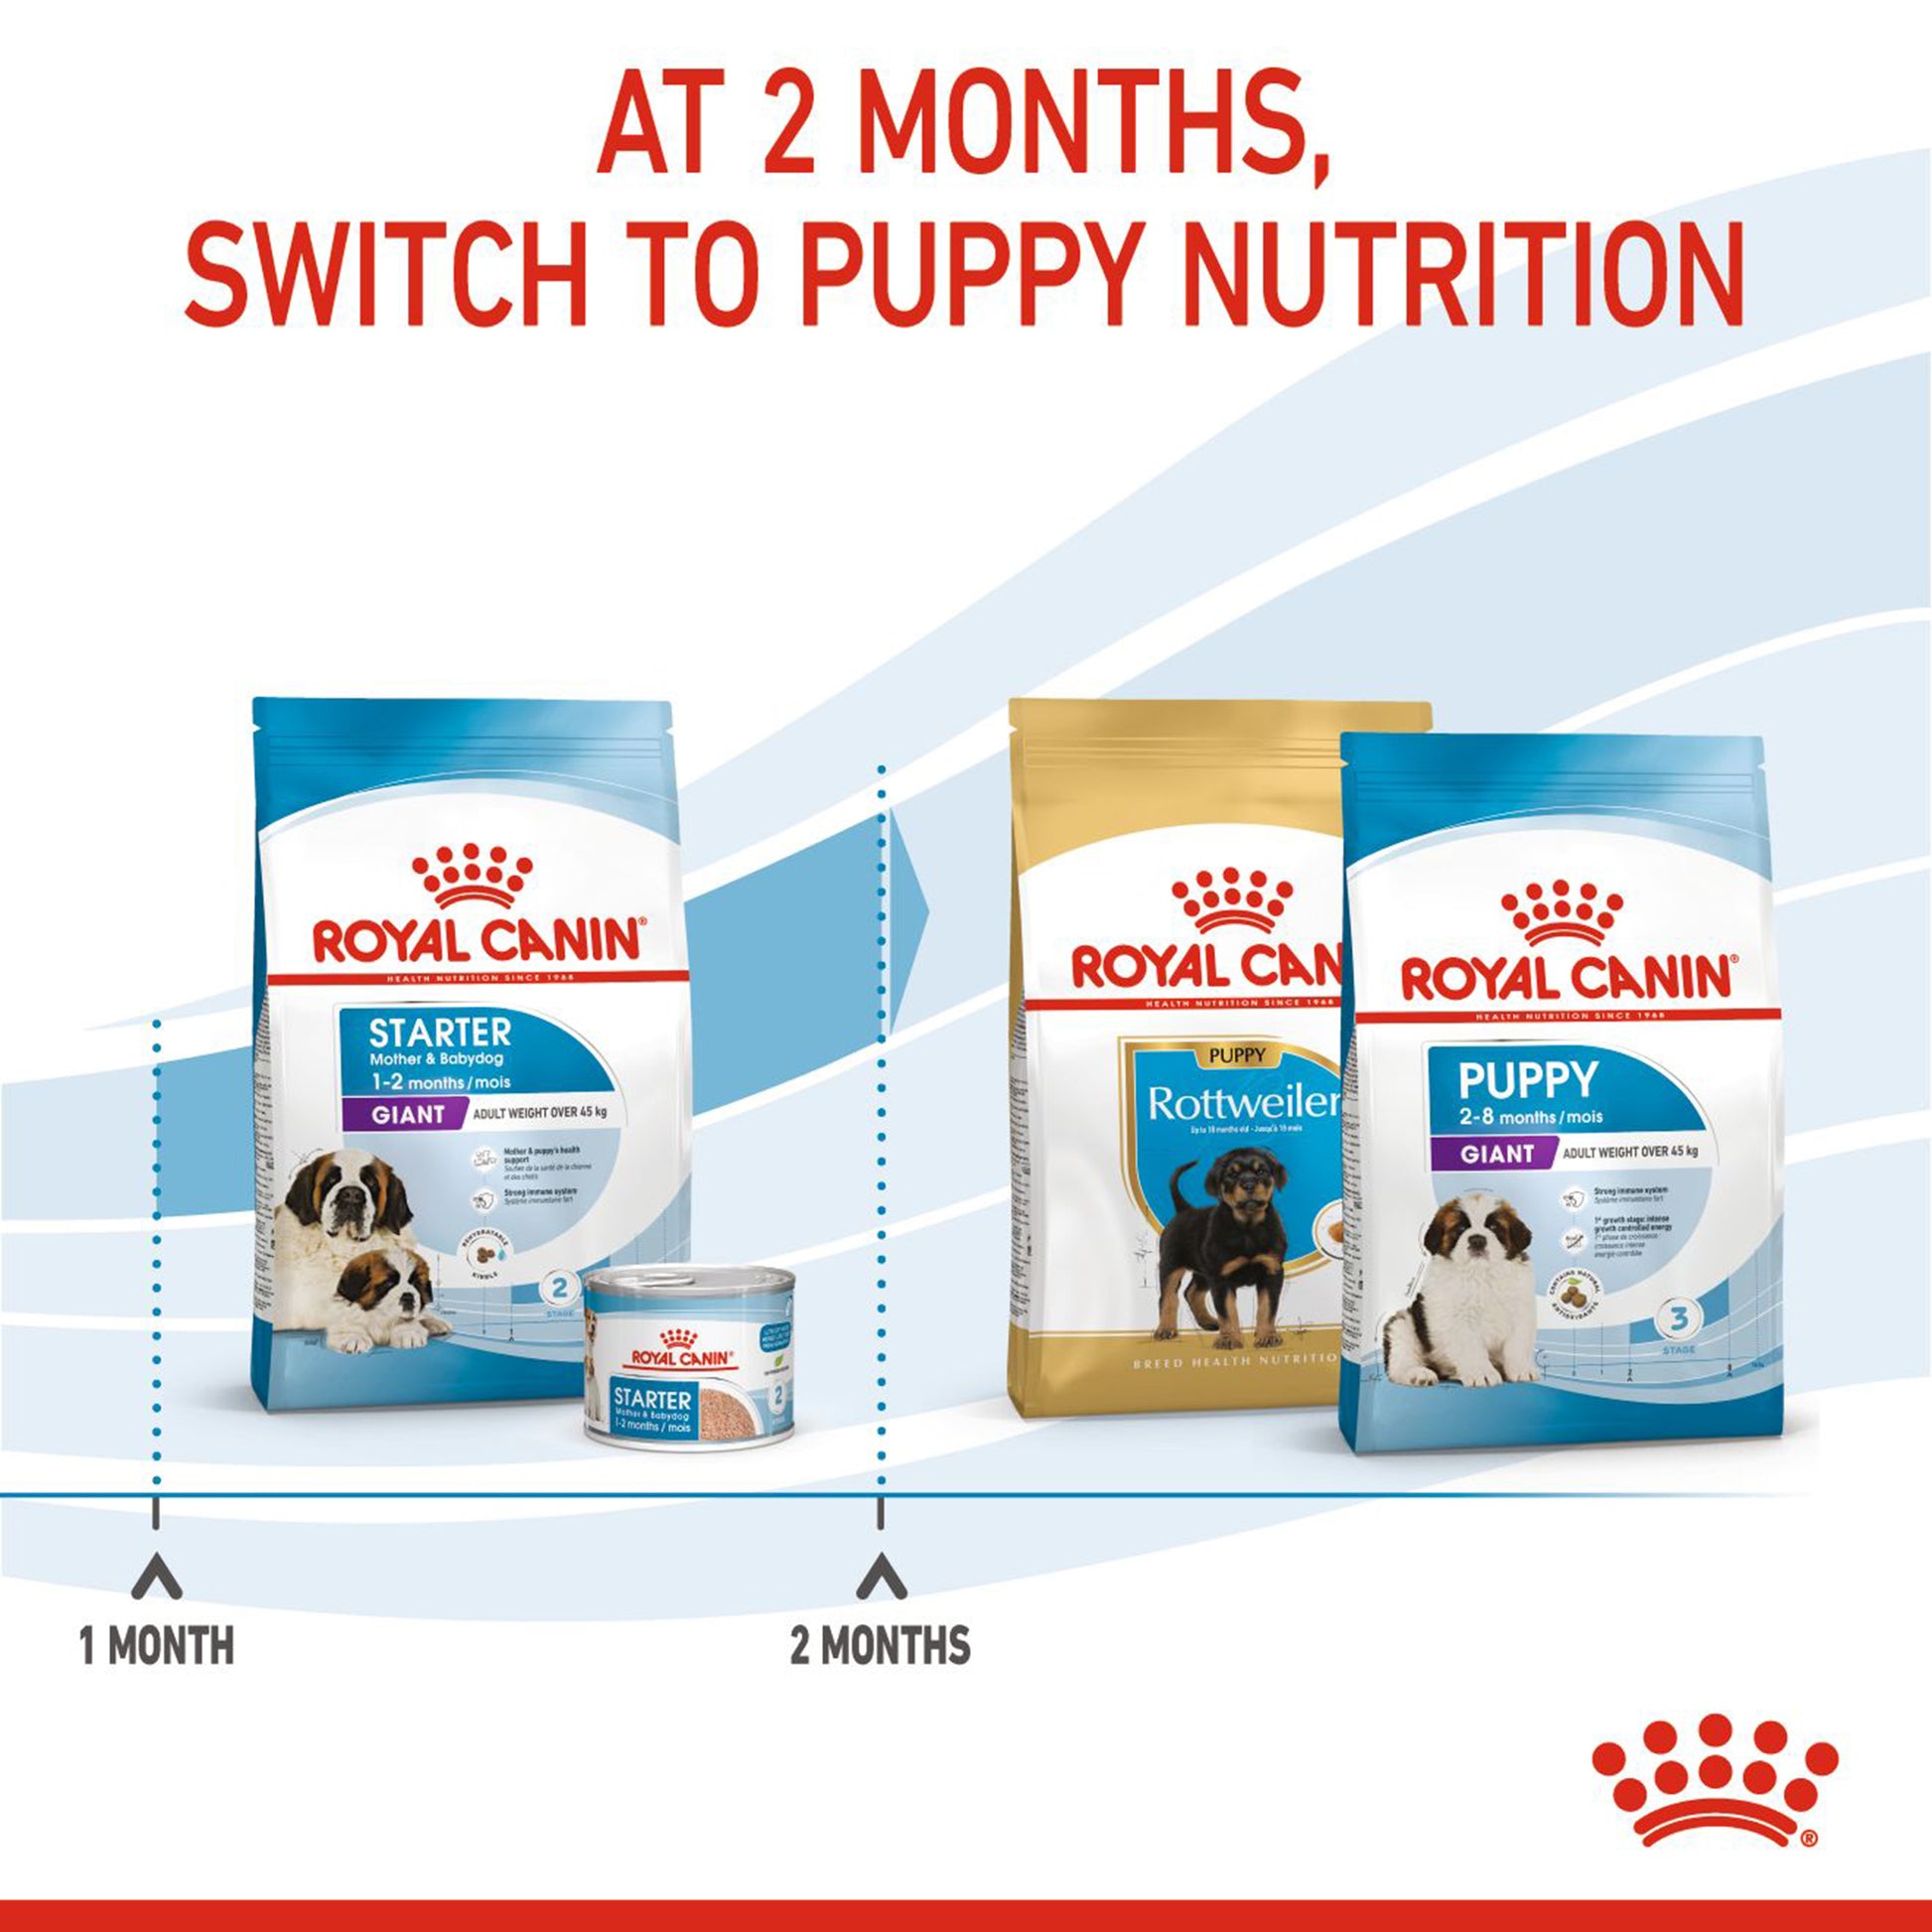 Royal Canin Giant Starter Dry Dog Food - Heads Up For Tails